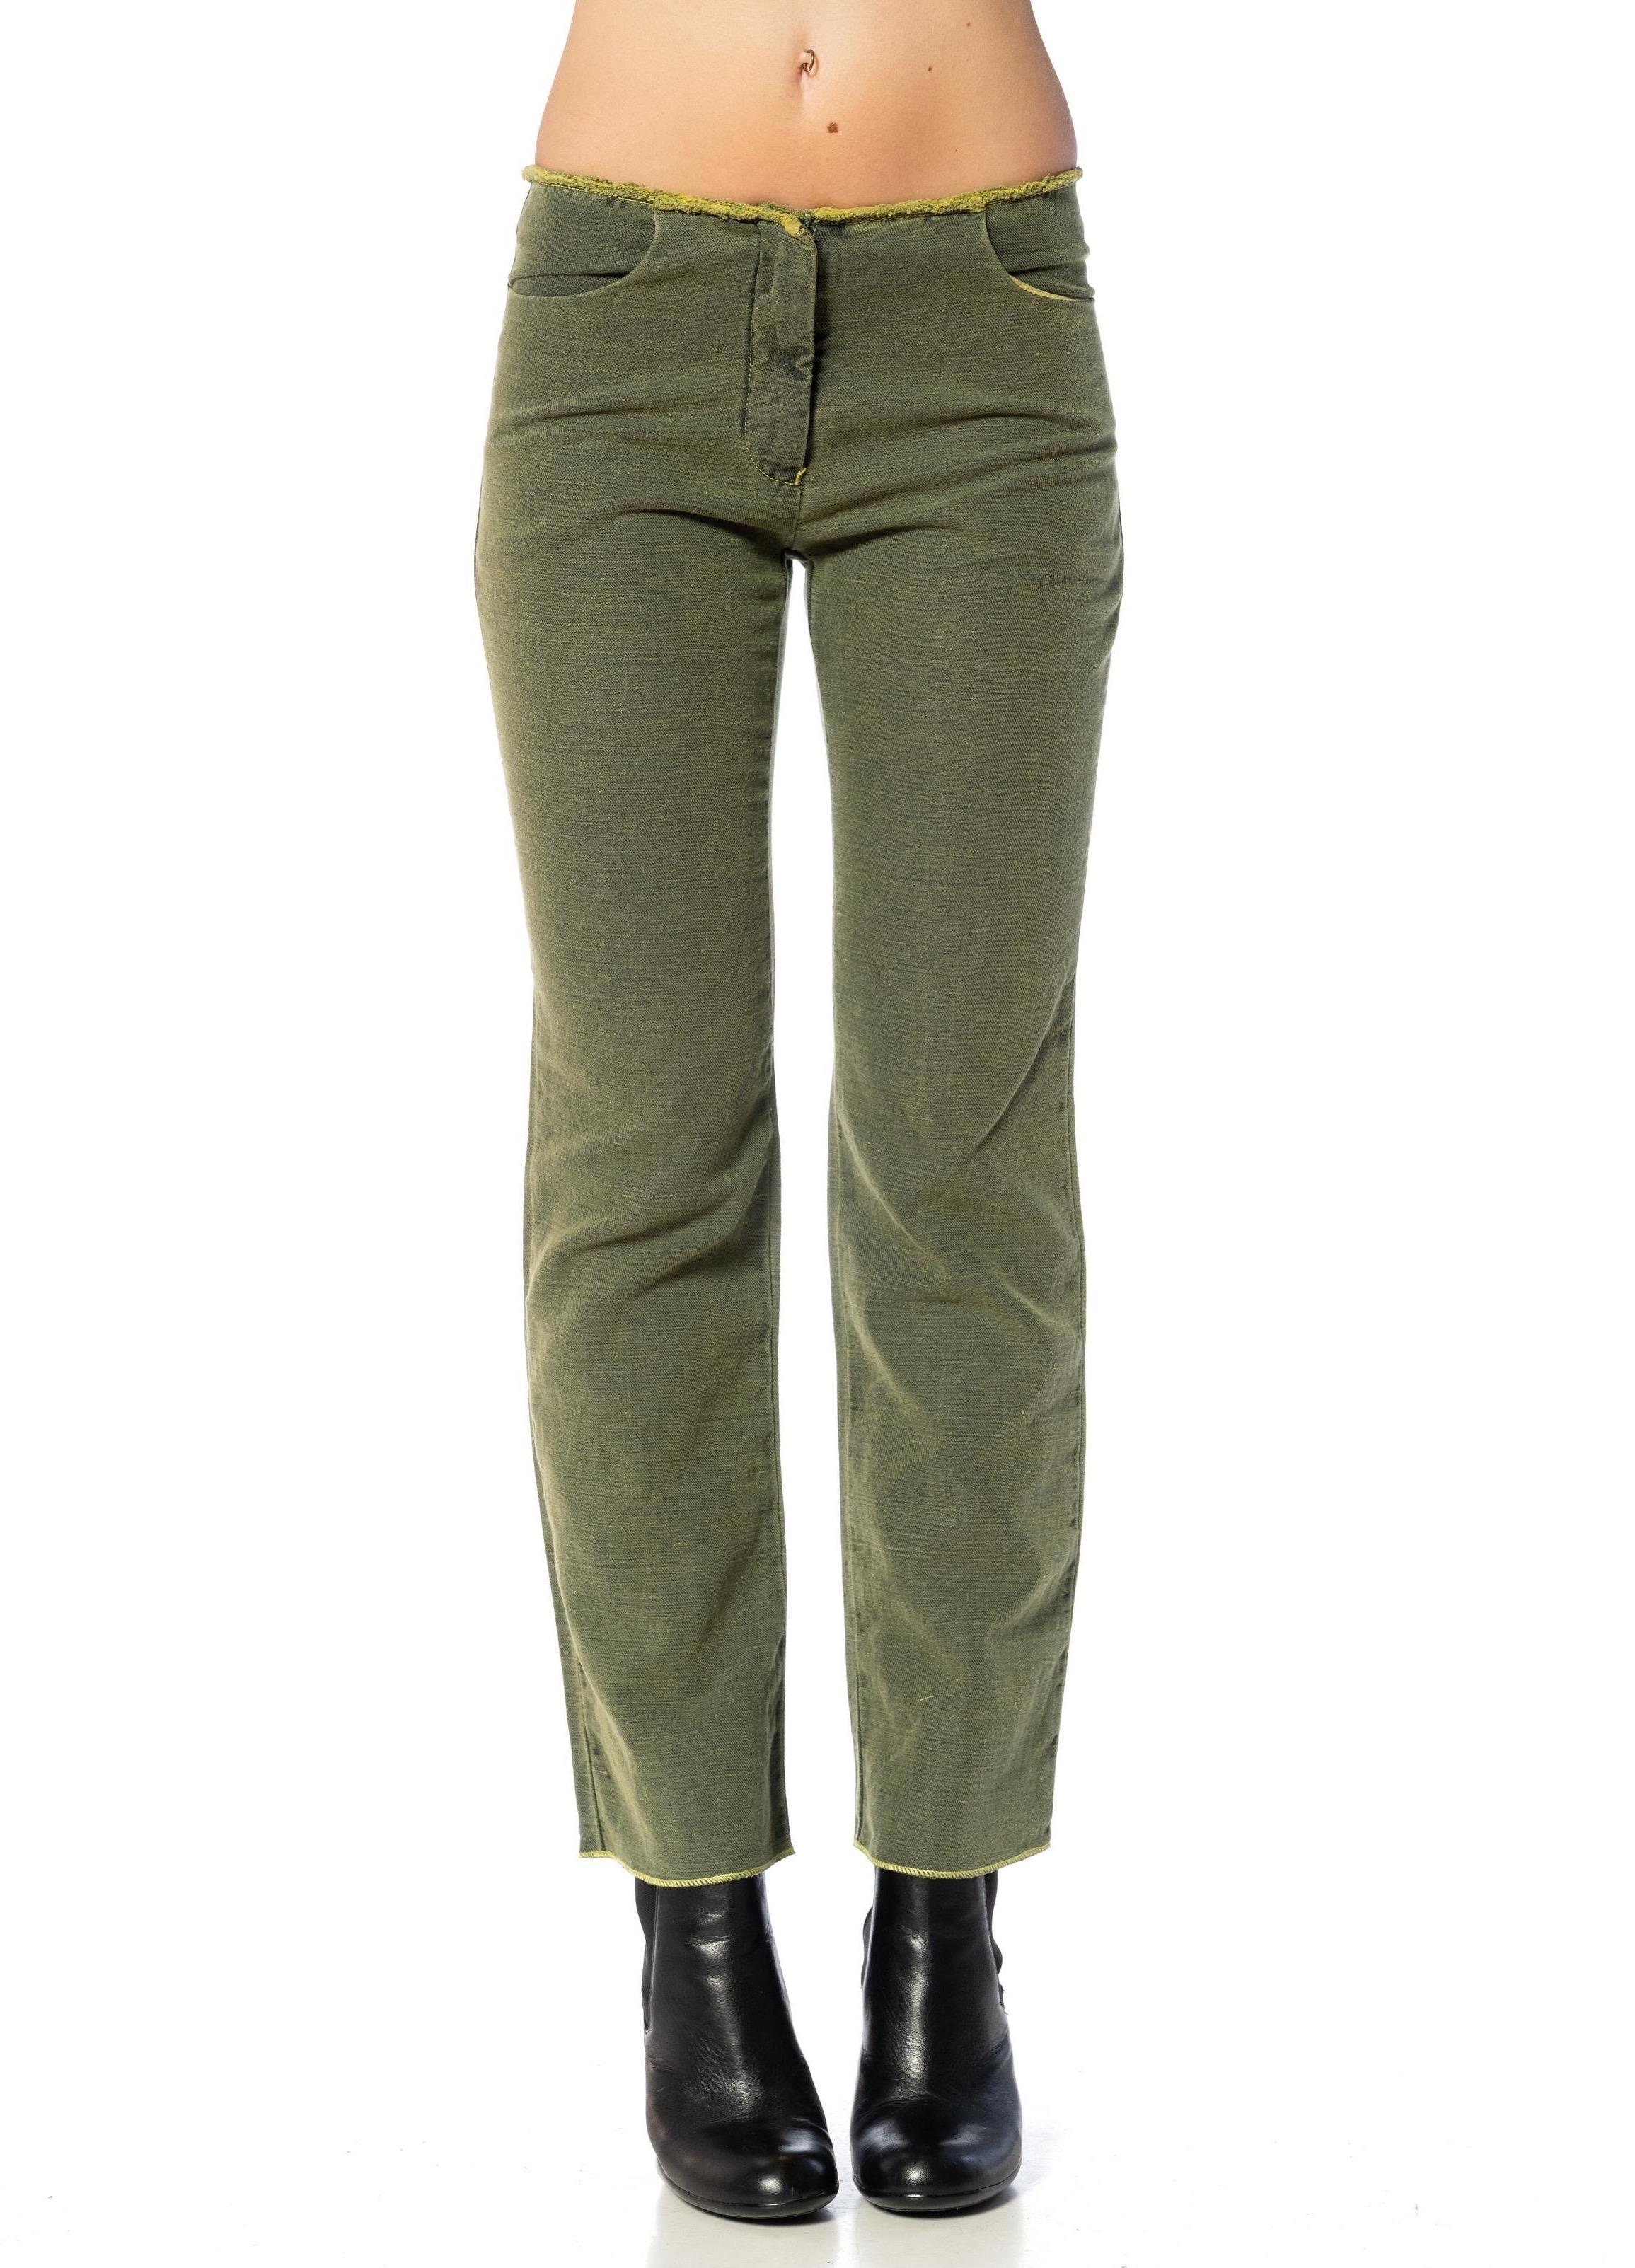 2000S MARTIN MARGIELA Forrest Green Cotton & Linen Relaxed Fit Jeans In Excellent Condition For Sale In New York, NY